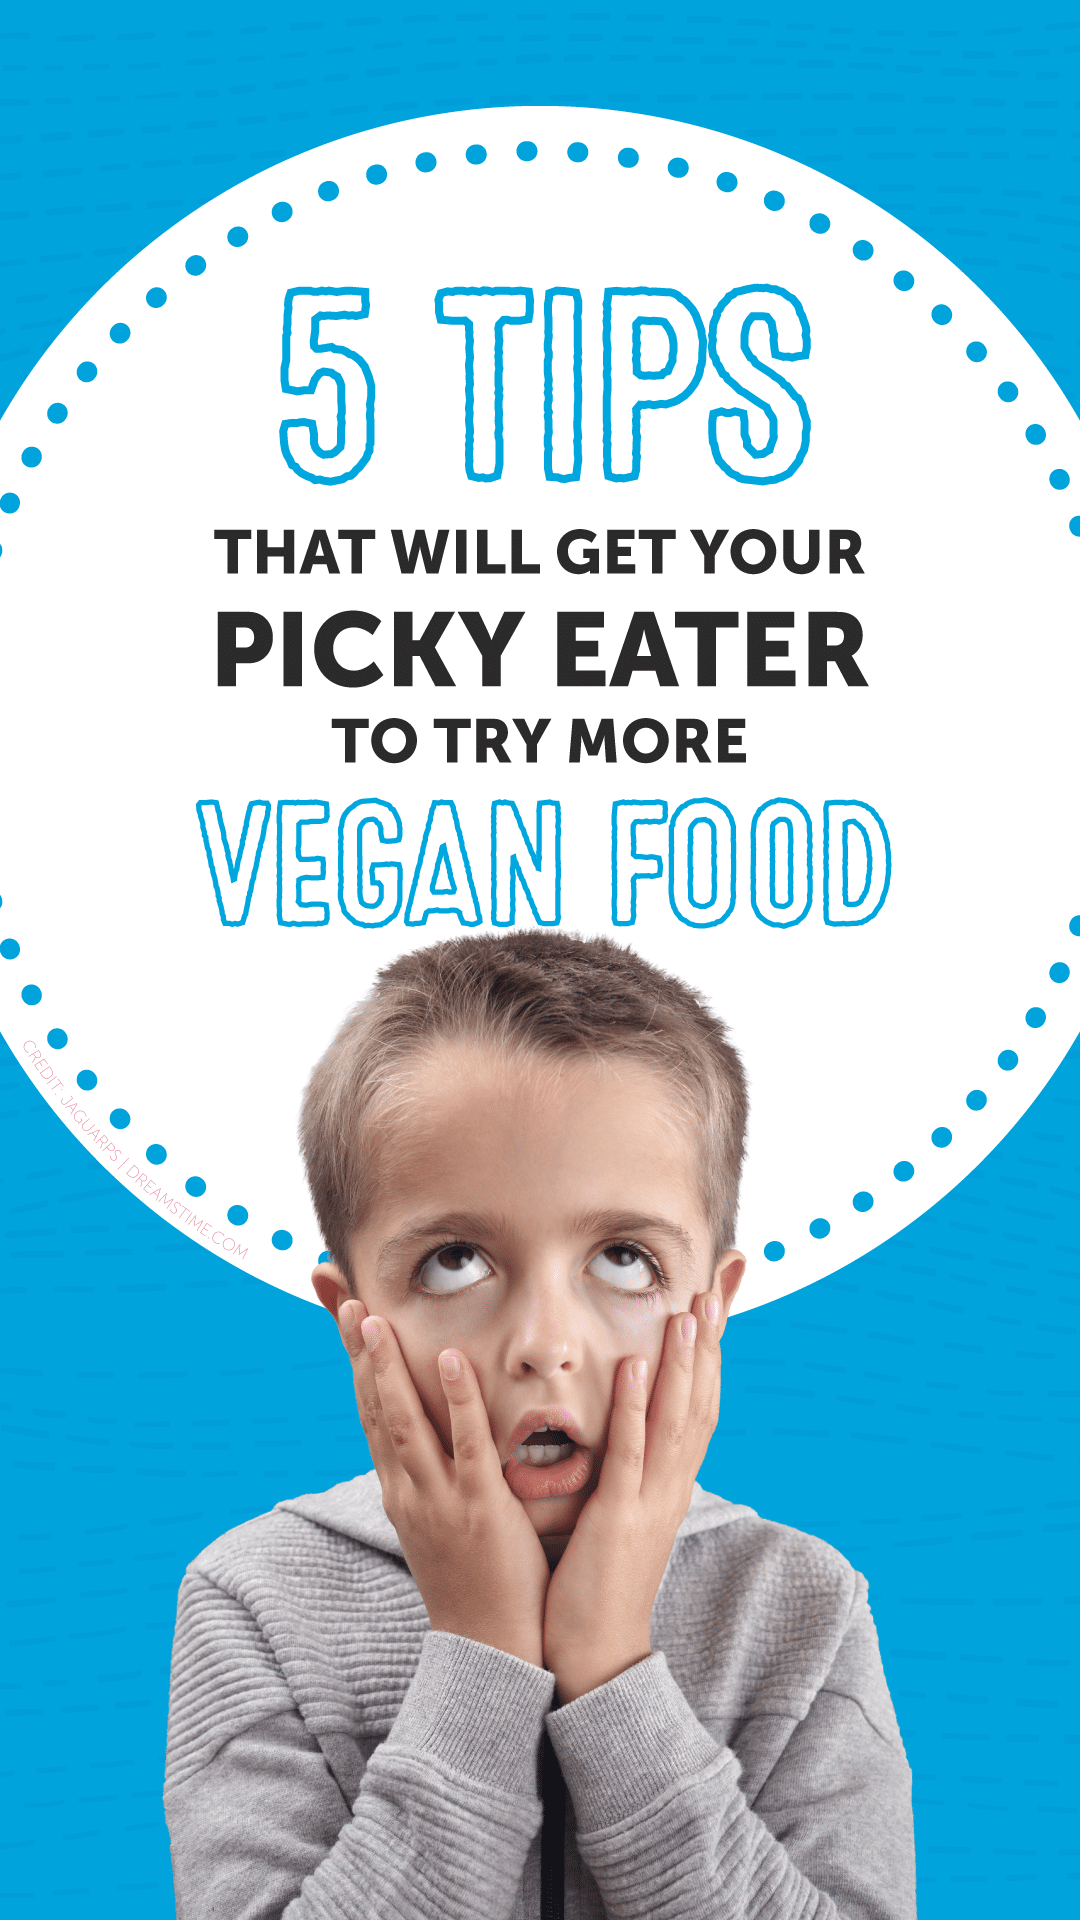 5 Tips That Will Get Your Picky Eater to Try More Vegan Food